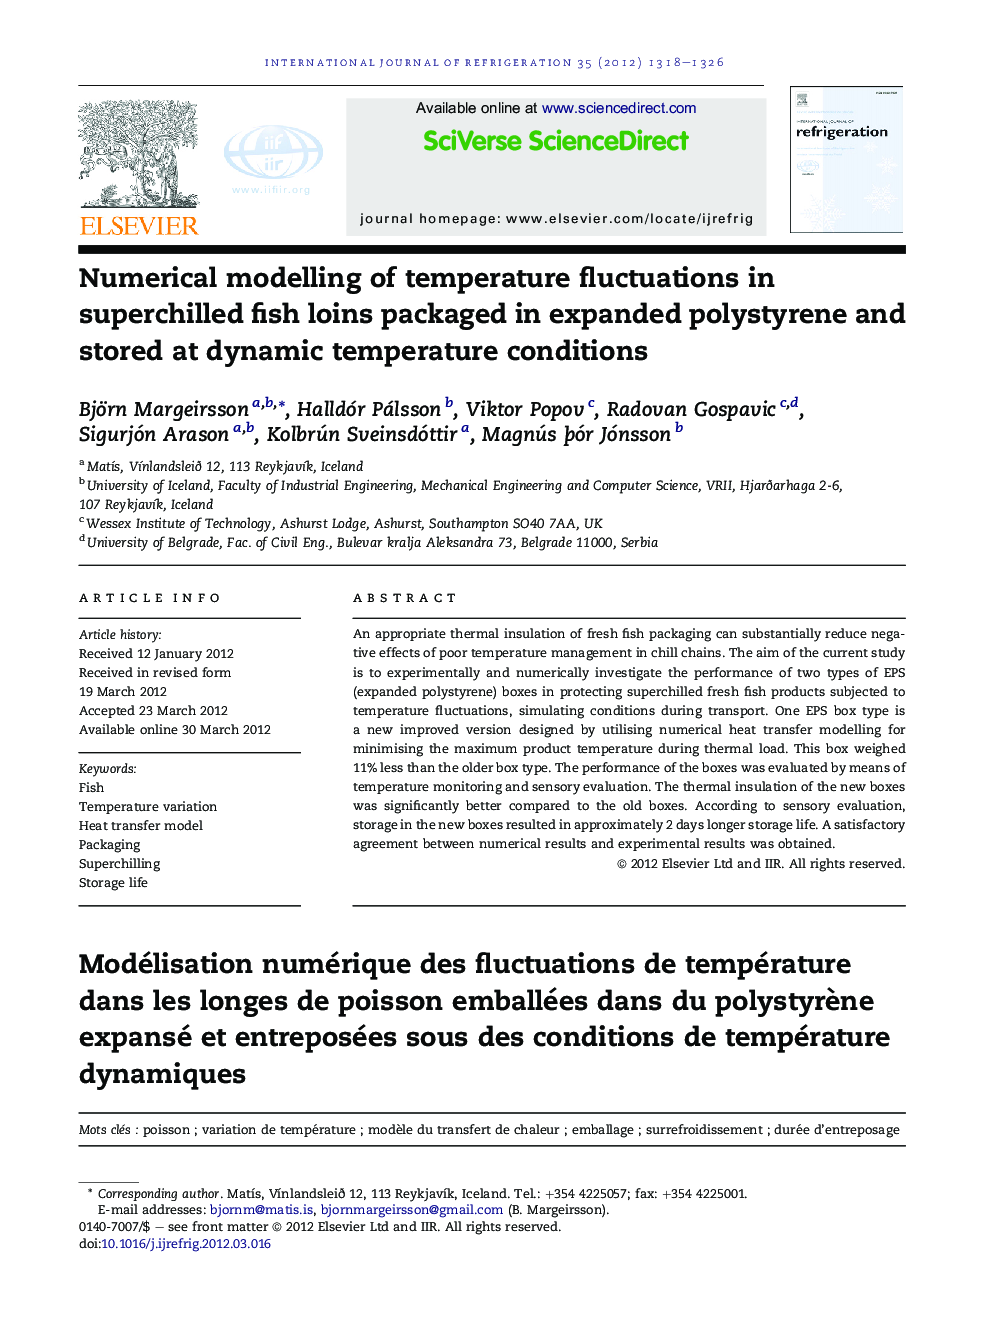 Numerical modelling of temperature fluctuations in superchilled fish loins packaged in expanded polystyrene and stored at dynamic temperature conditions